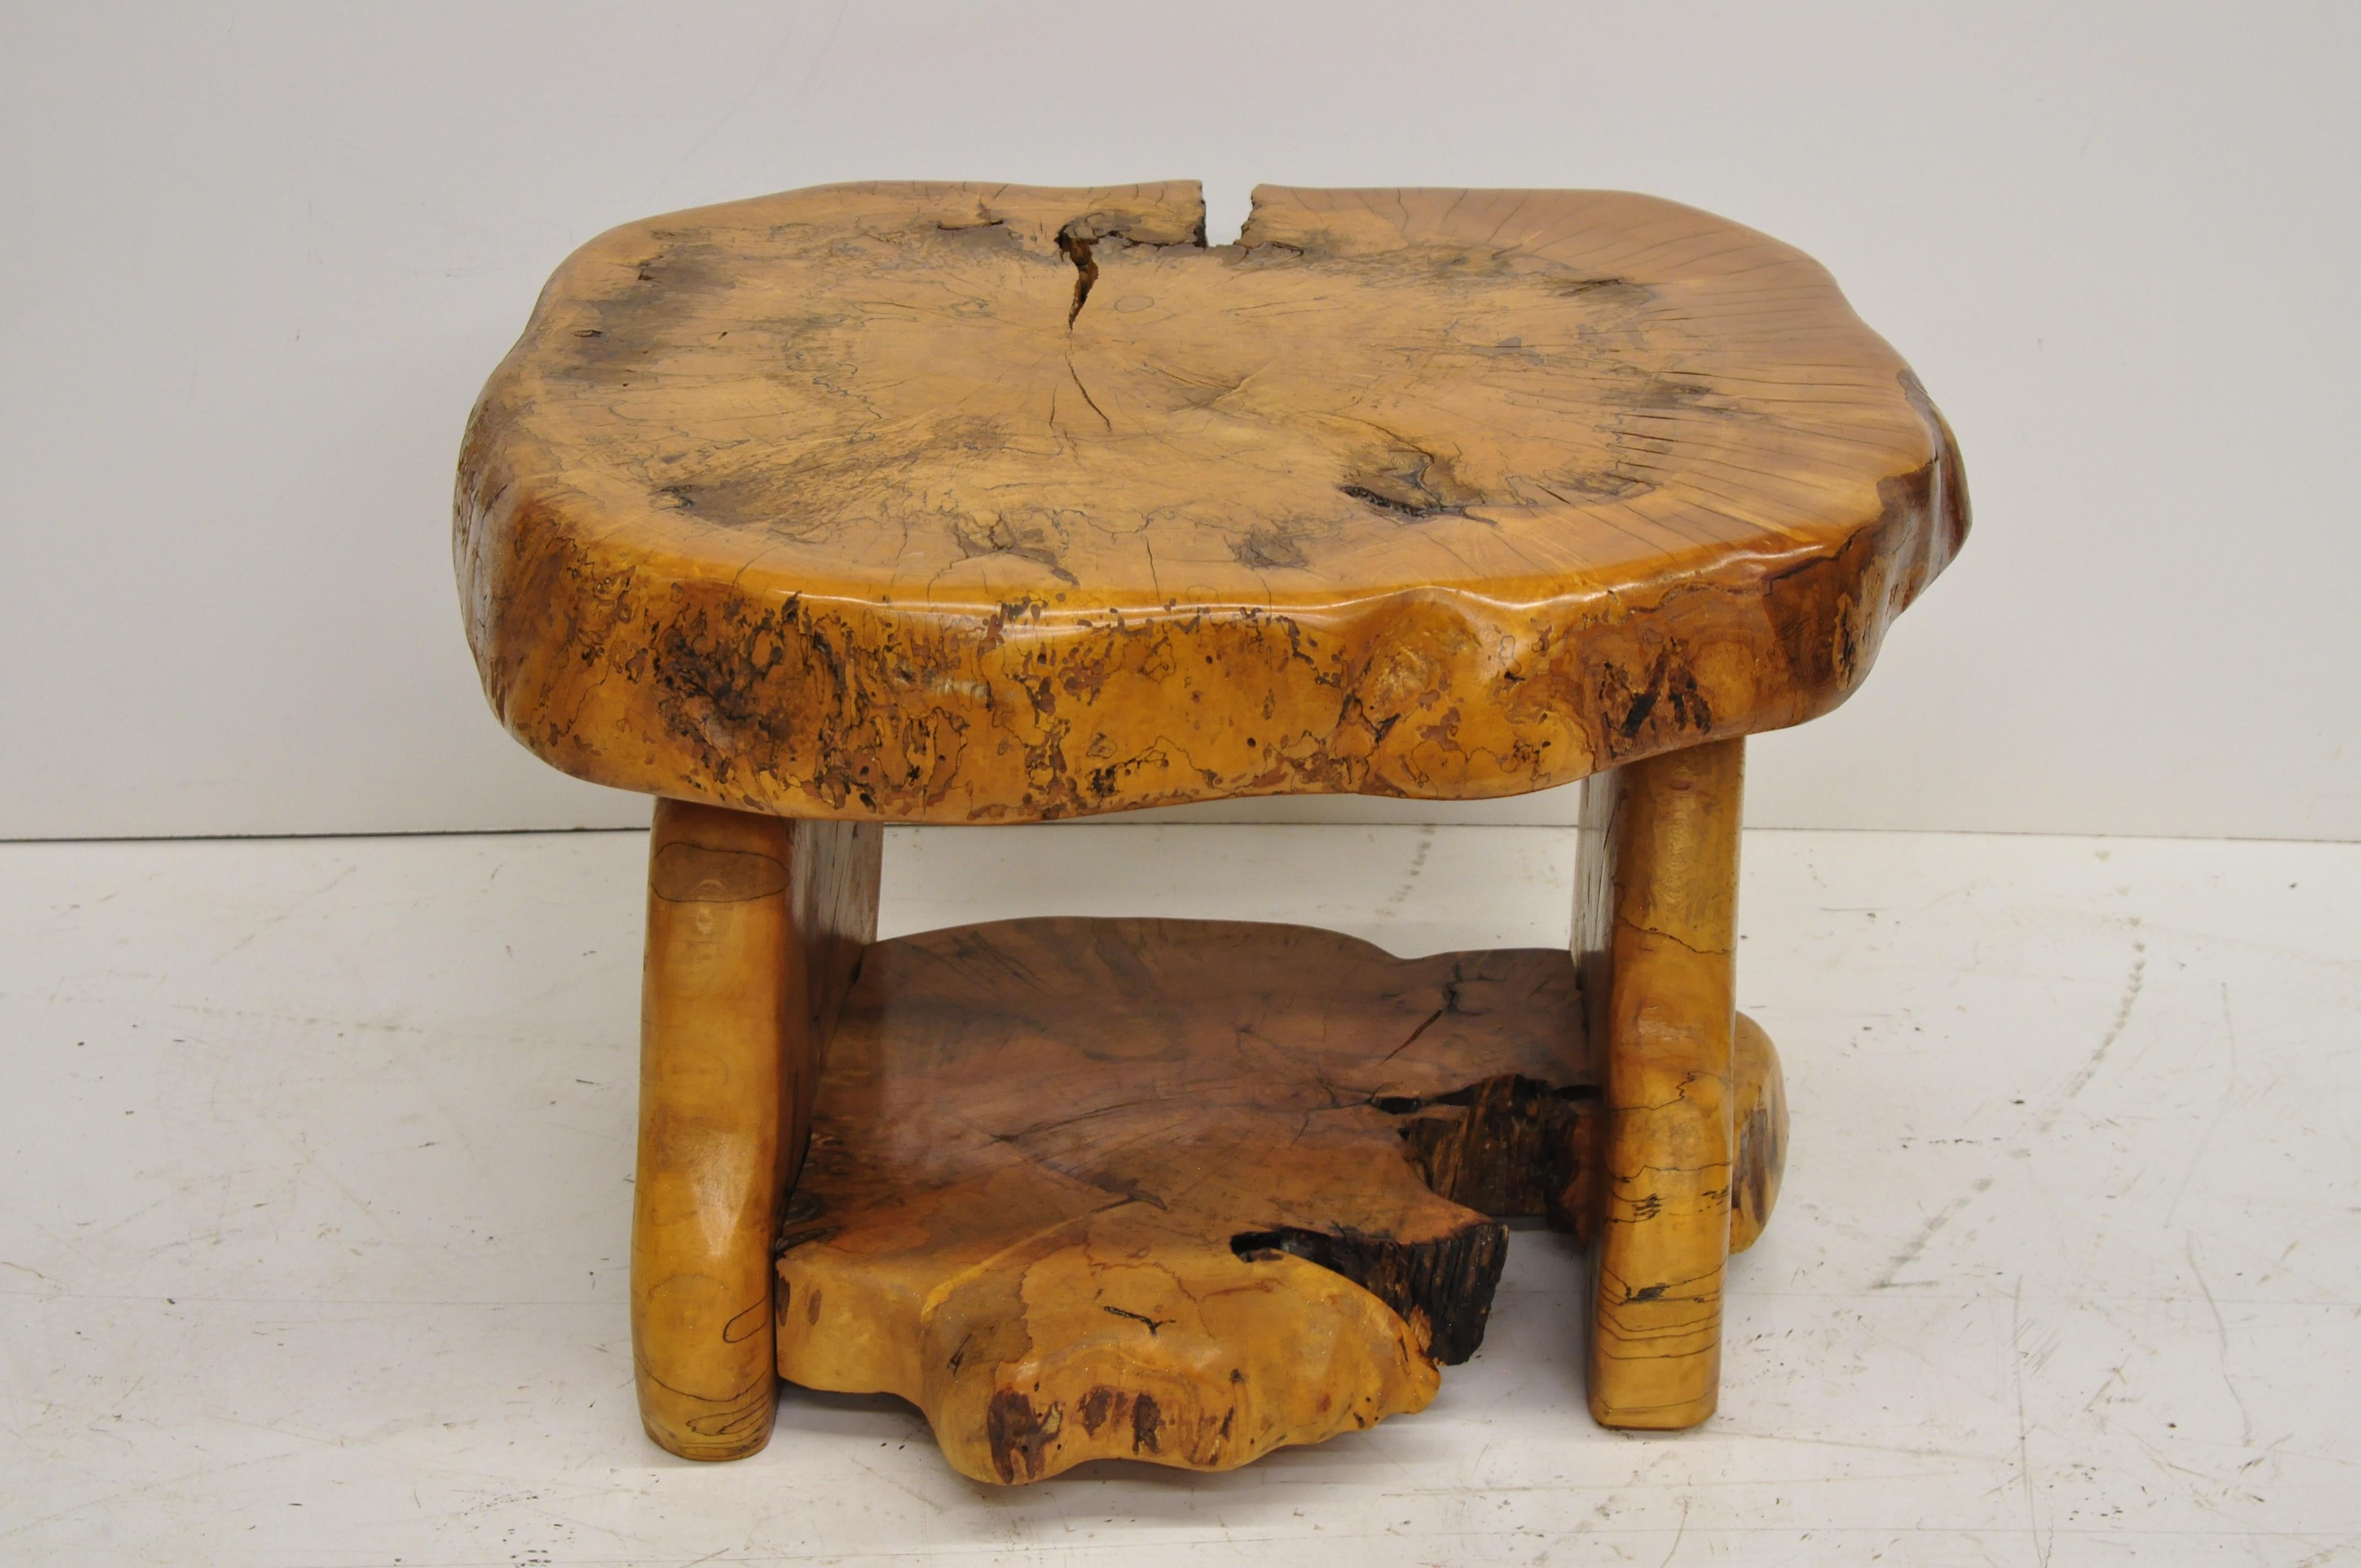 Mid-Century Modern live edge burl wood slab coffee table by Fabulous Furniture, circa 1976. Item is by Fabulous Furniture and designed by Steve Heller in New York, solid wood construction, beautiful spalted wood, original signature, sleek sculptural